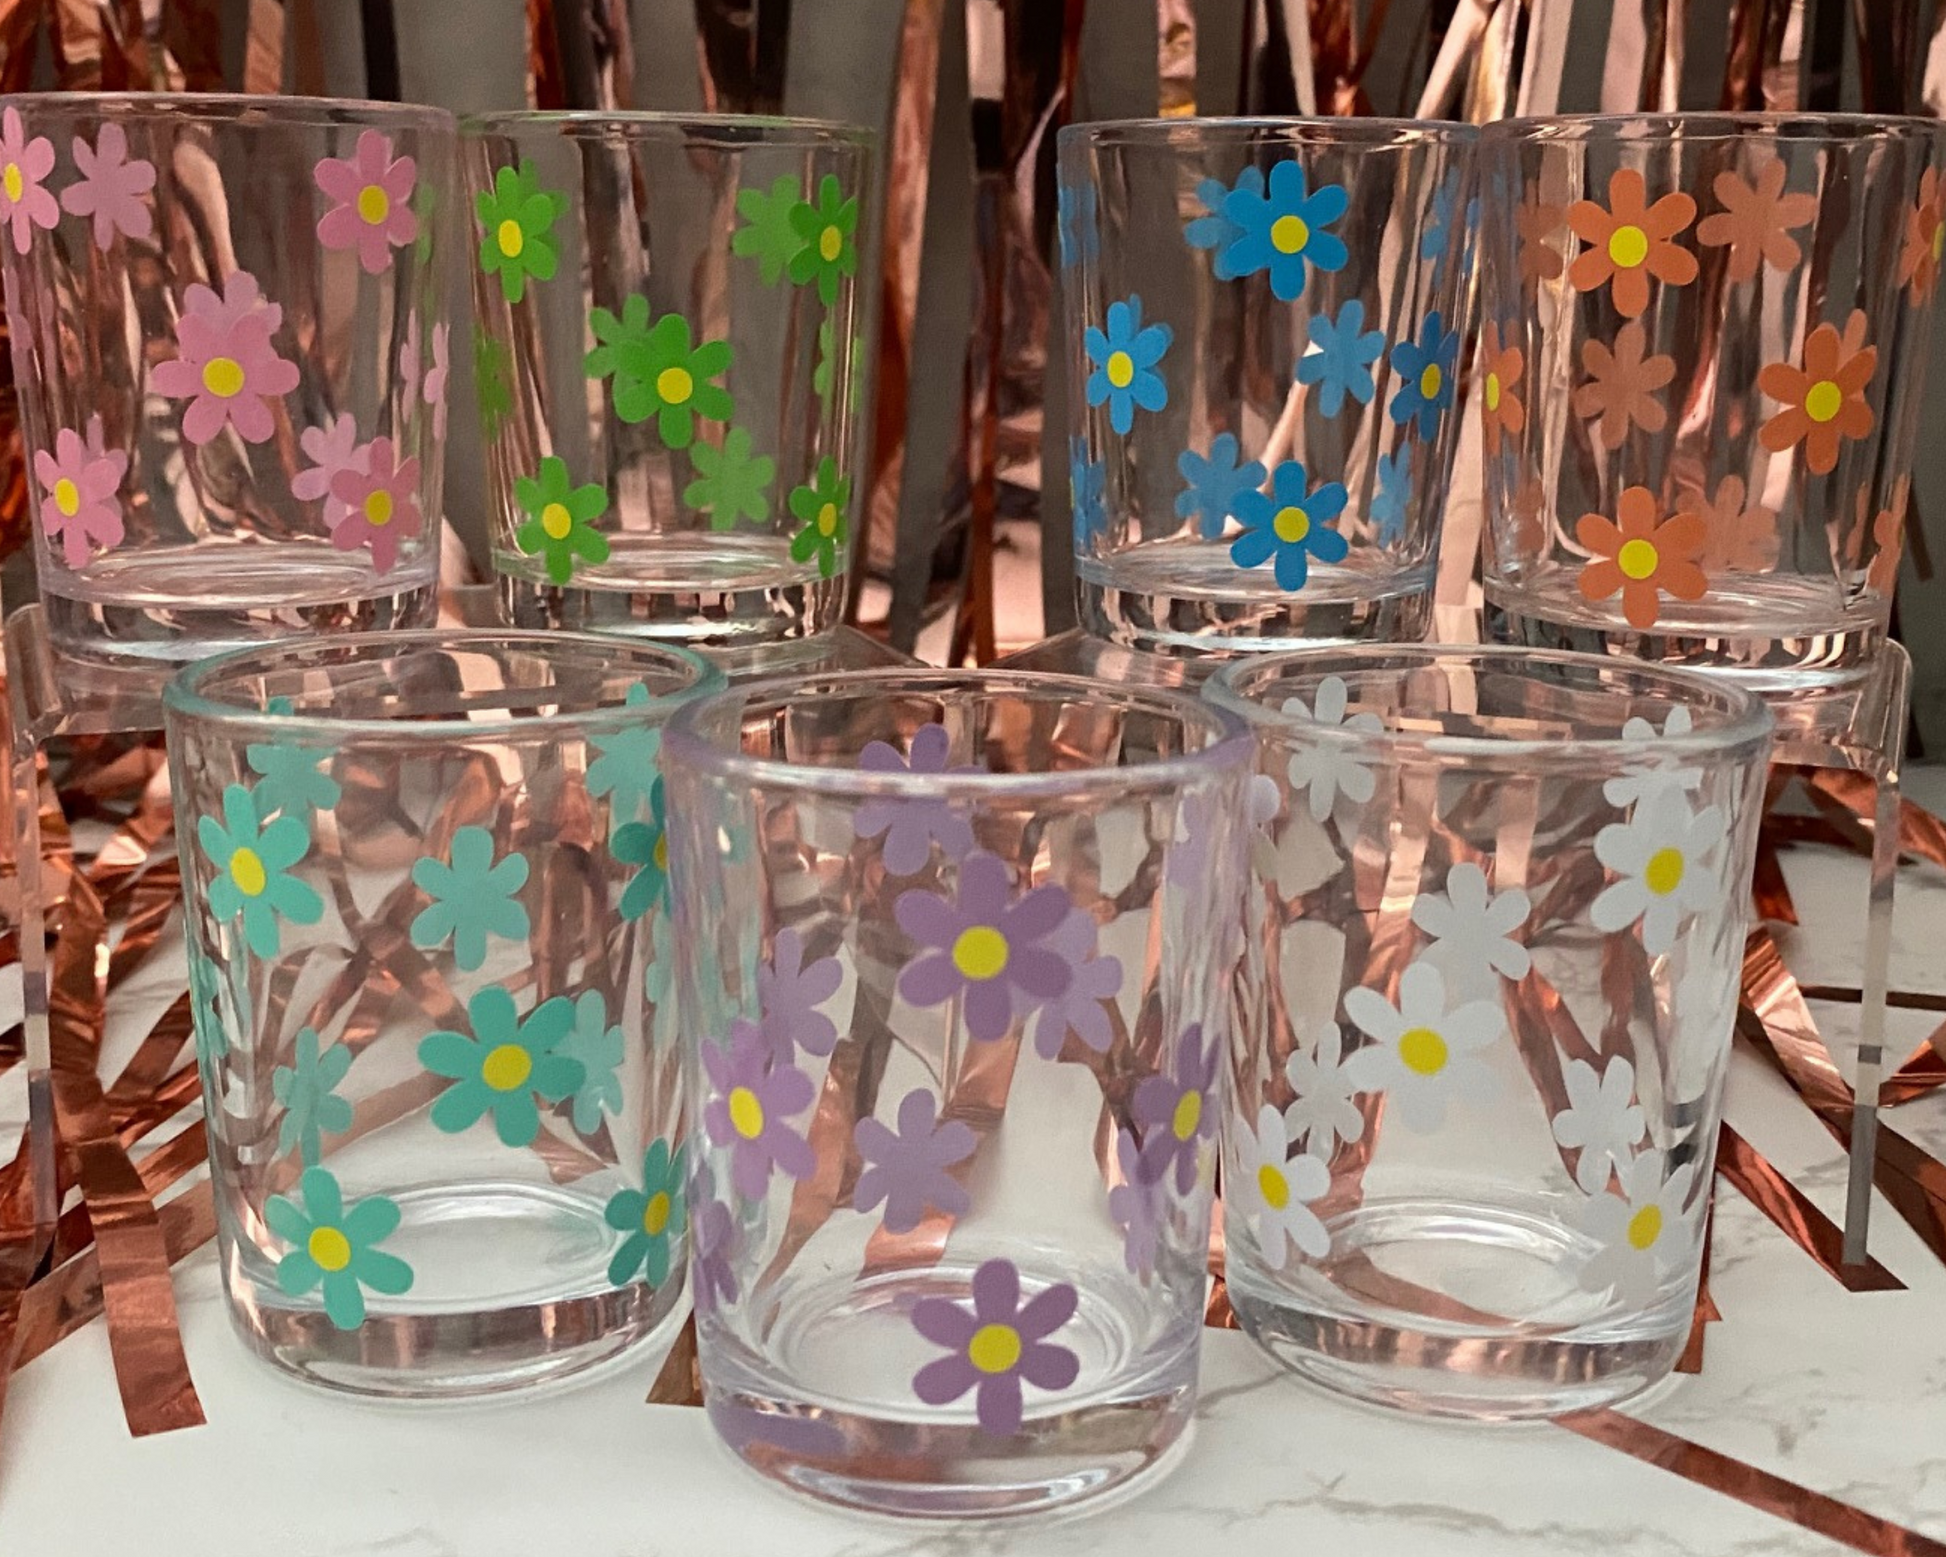 seven shot glasses with a daisy flower design on it in green, mint, blue, orange, purple, pink and white with yellow dots in the middle, fun party background